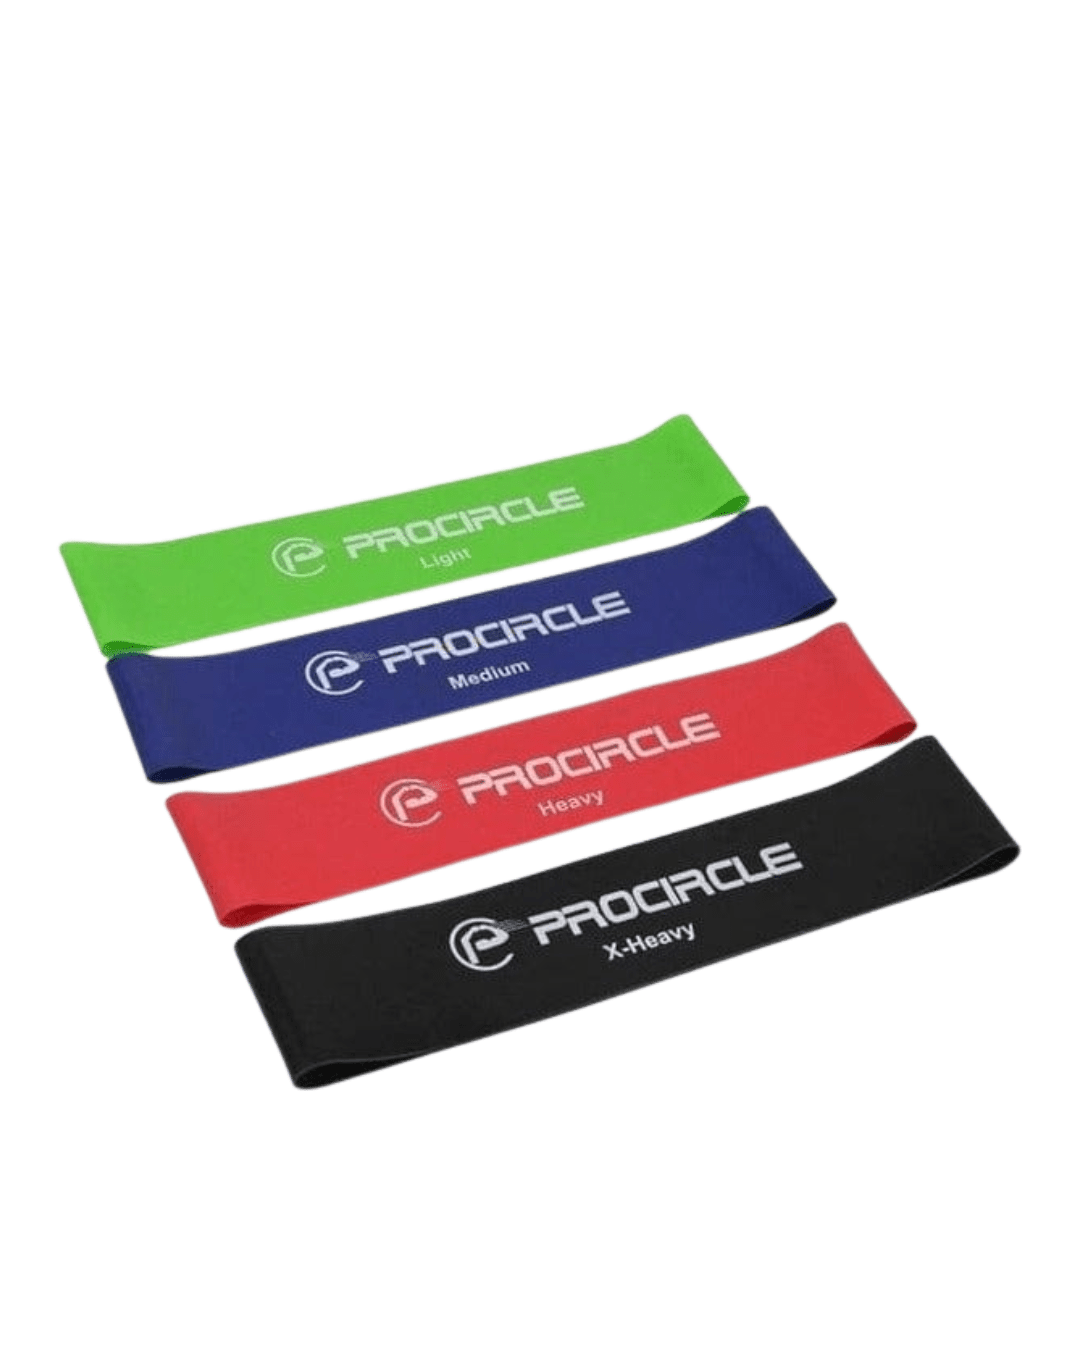 Muscle Engineering Resistance bands Natural Latex Resistance Bands Set 4pce Natural Latex Resistance Bands Set 4pceNatural Latex Resistance Bands